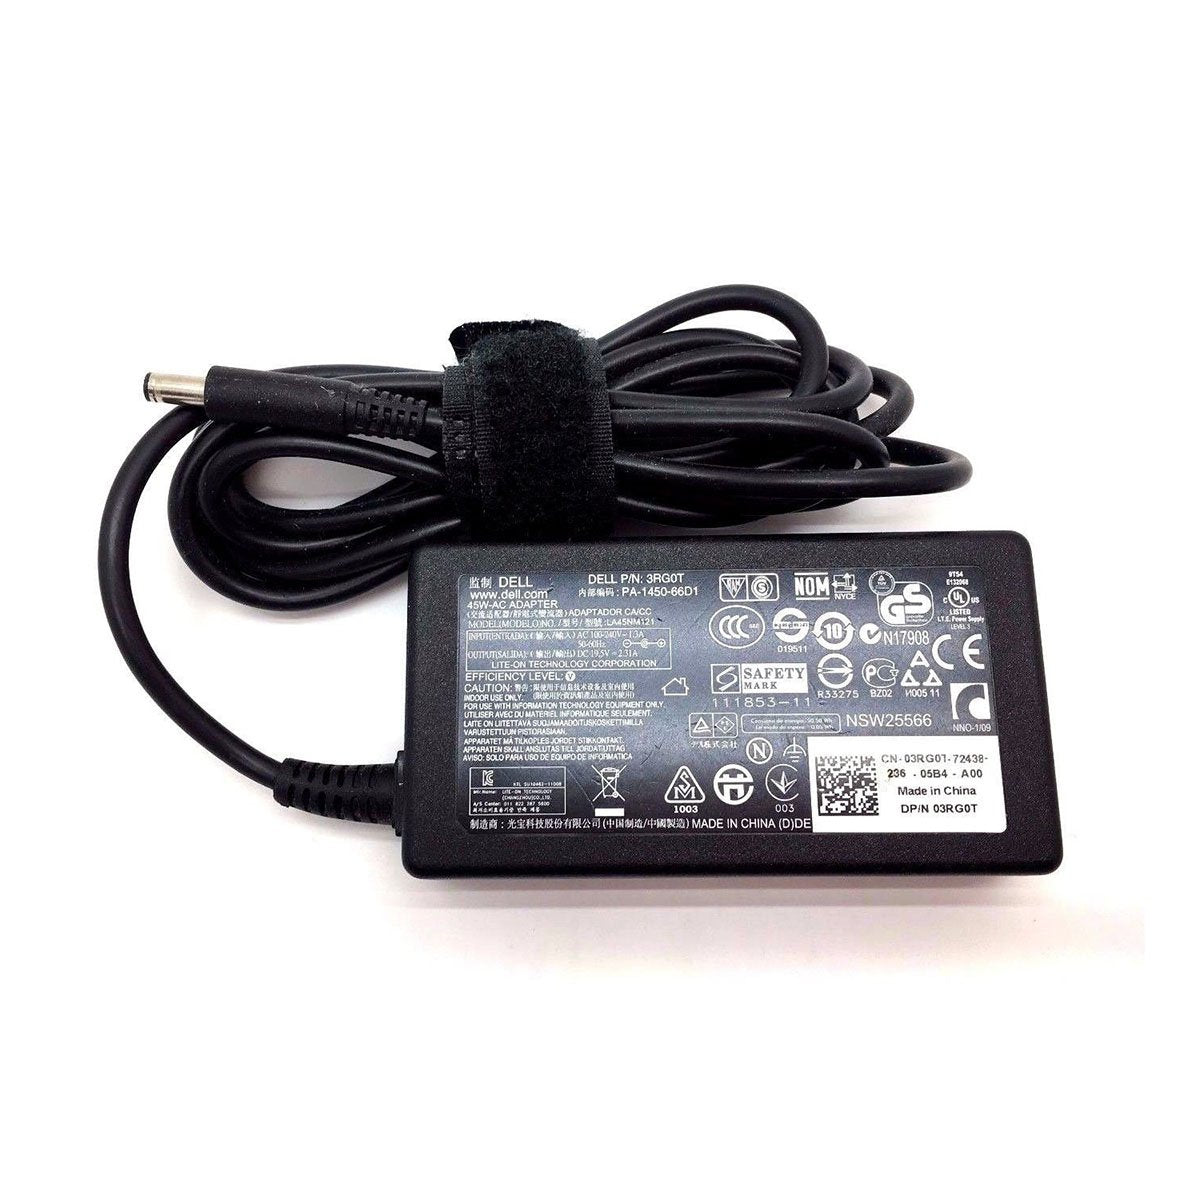 Dell Inspiron 11 3157 Original 45W Laptop Charger Adapter With Power Cord 19.5V 4.5mm Pin